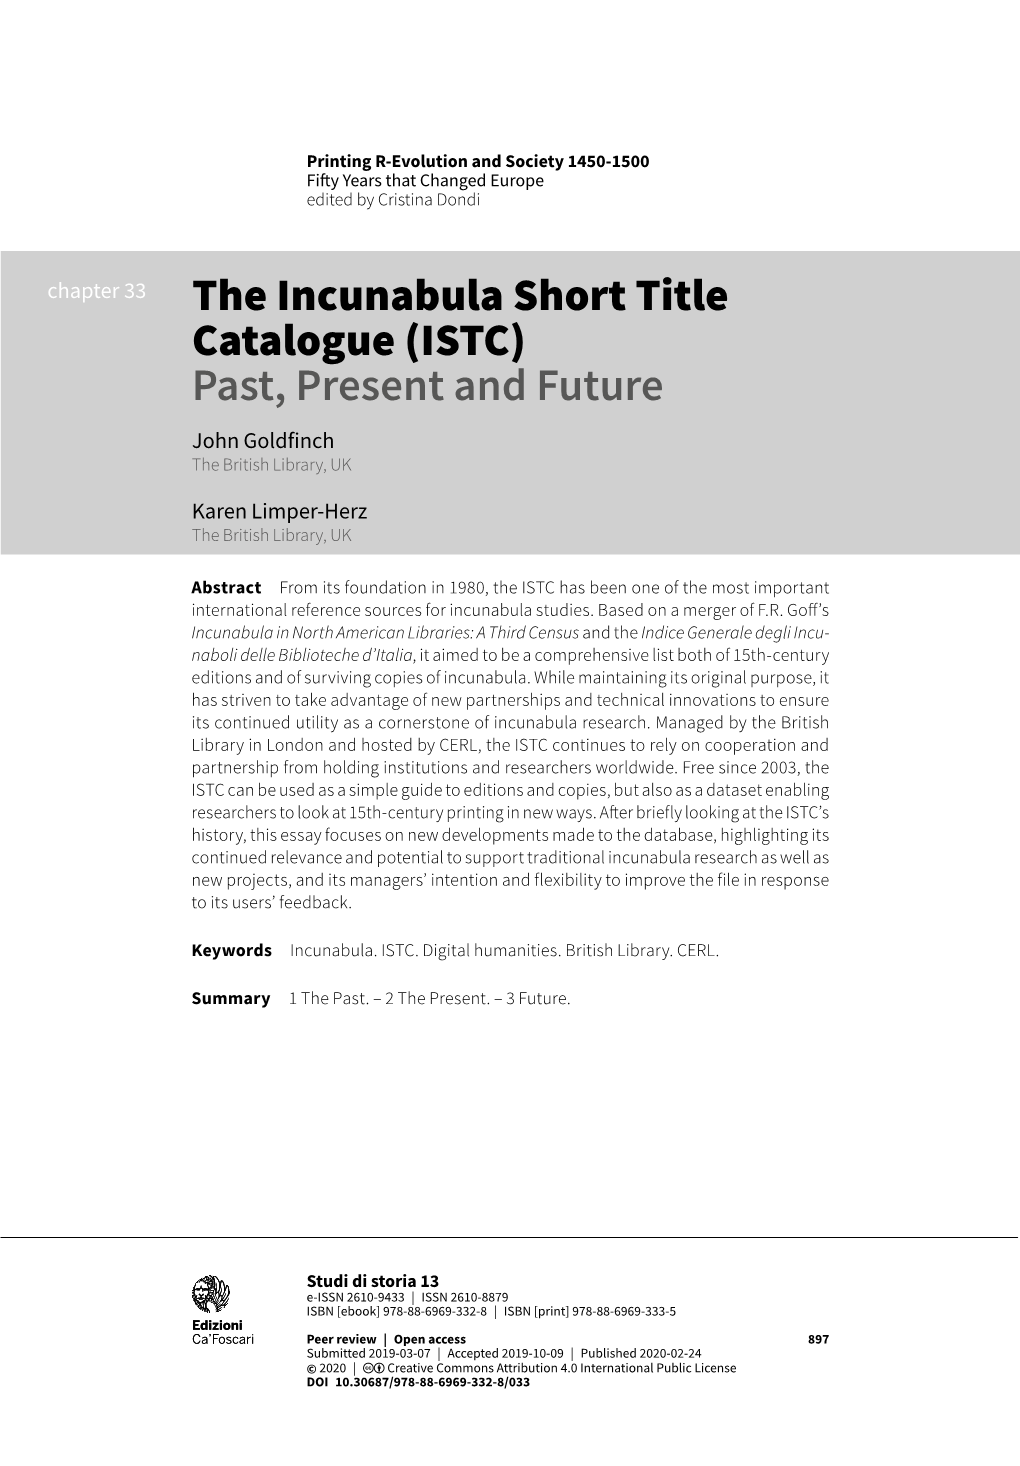 The Incunabula Short Title Catalogue (ISTC) Past, Present and Future John Goldfinch the British Library, UK